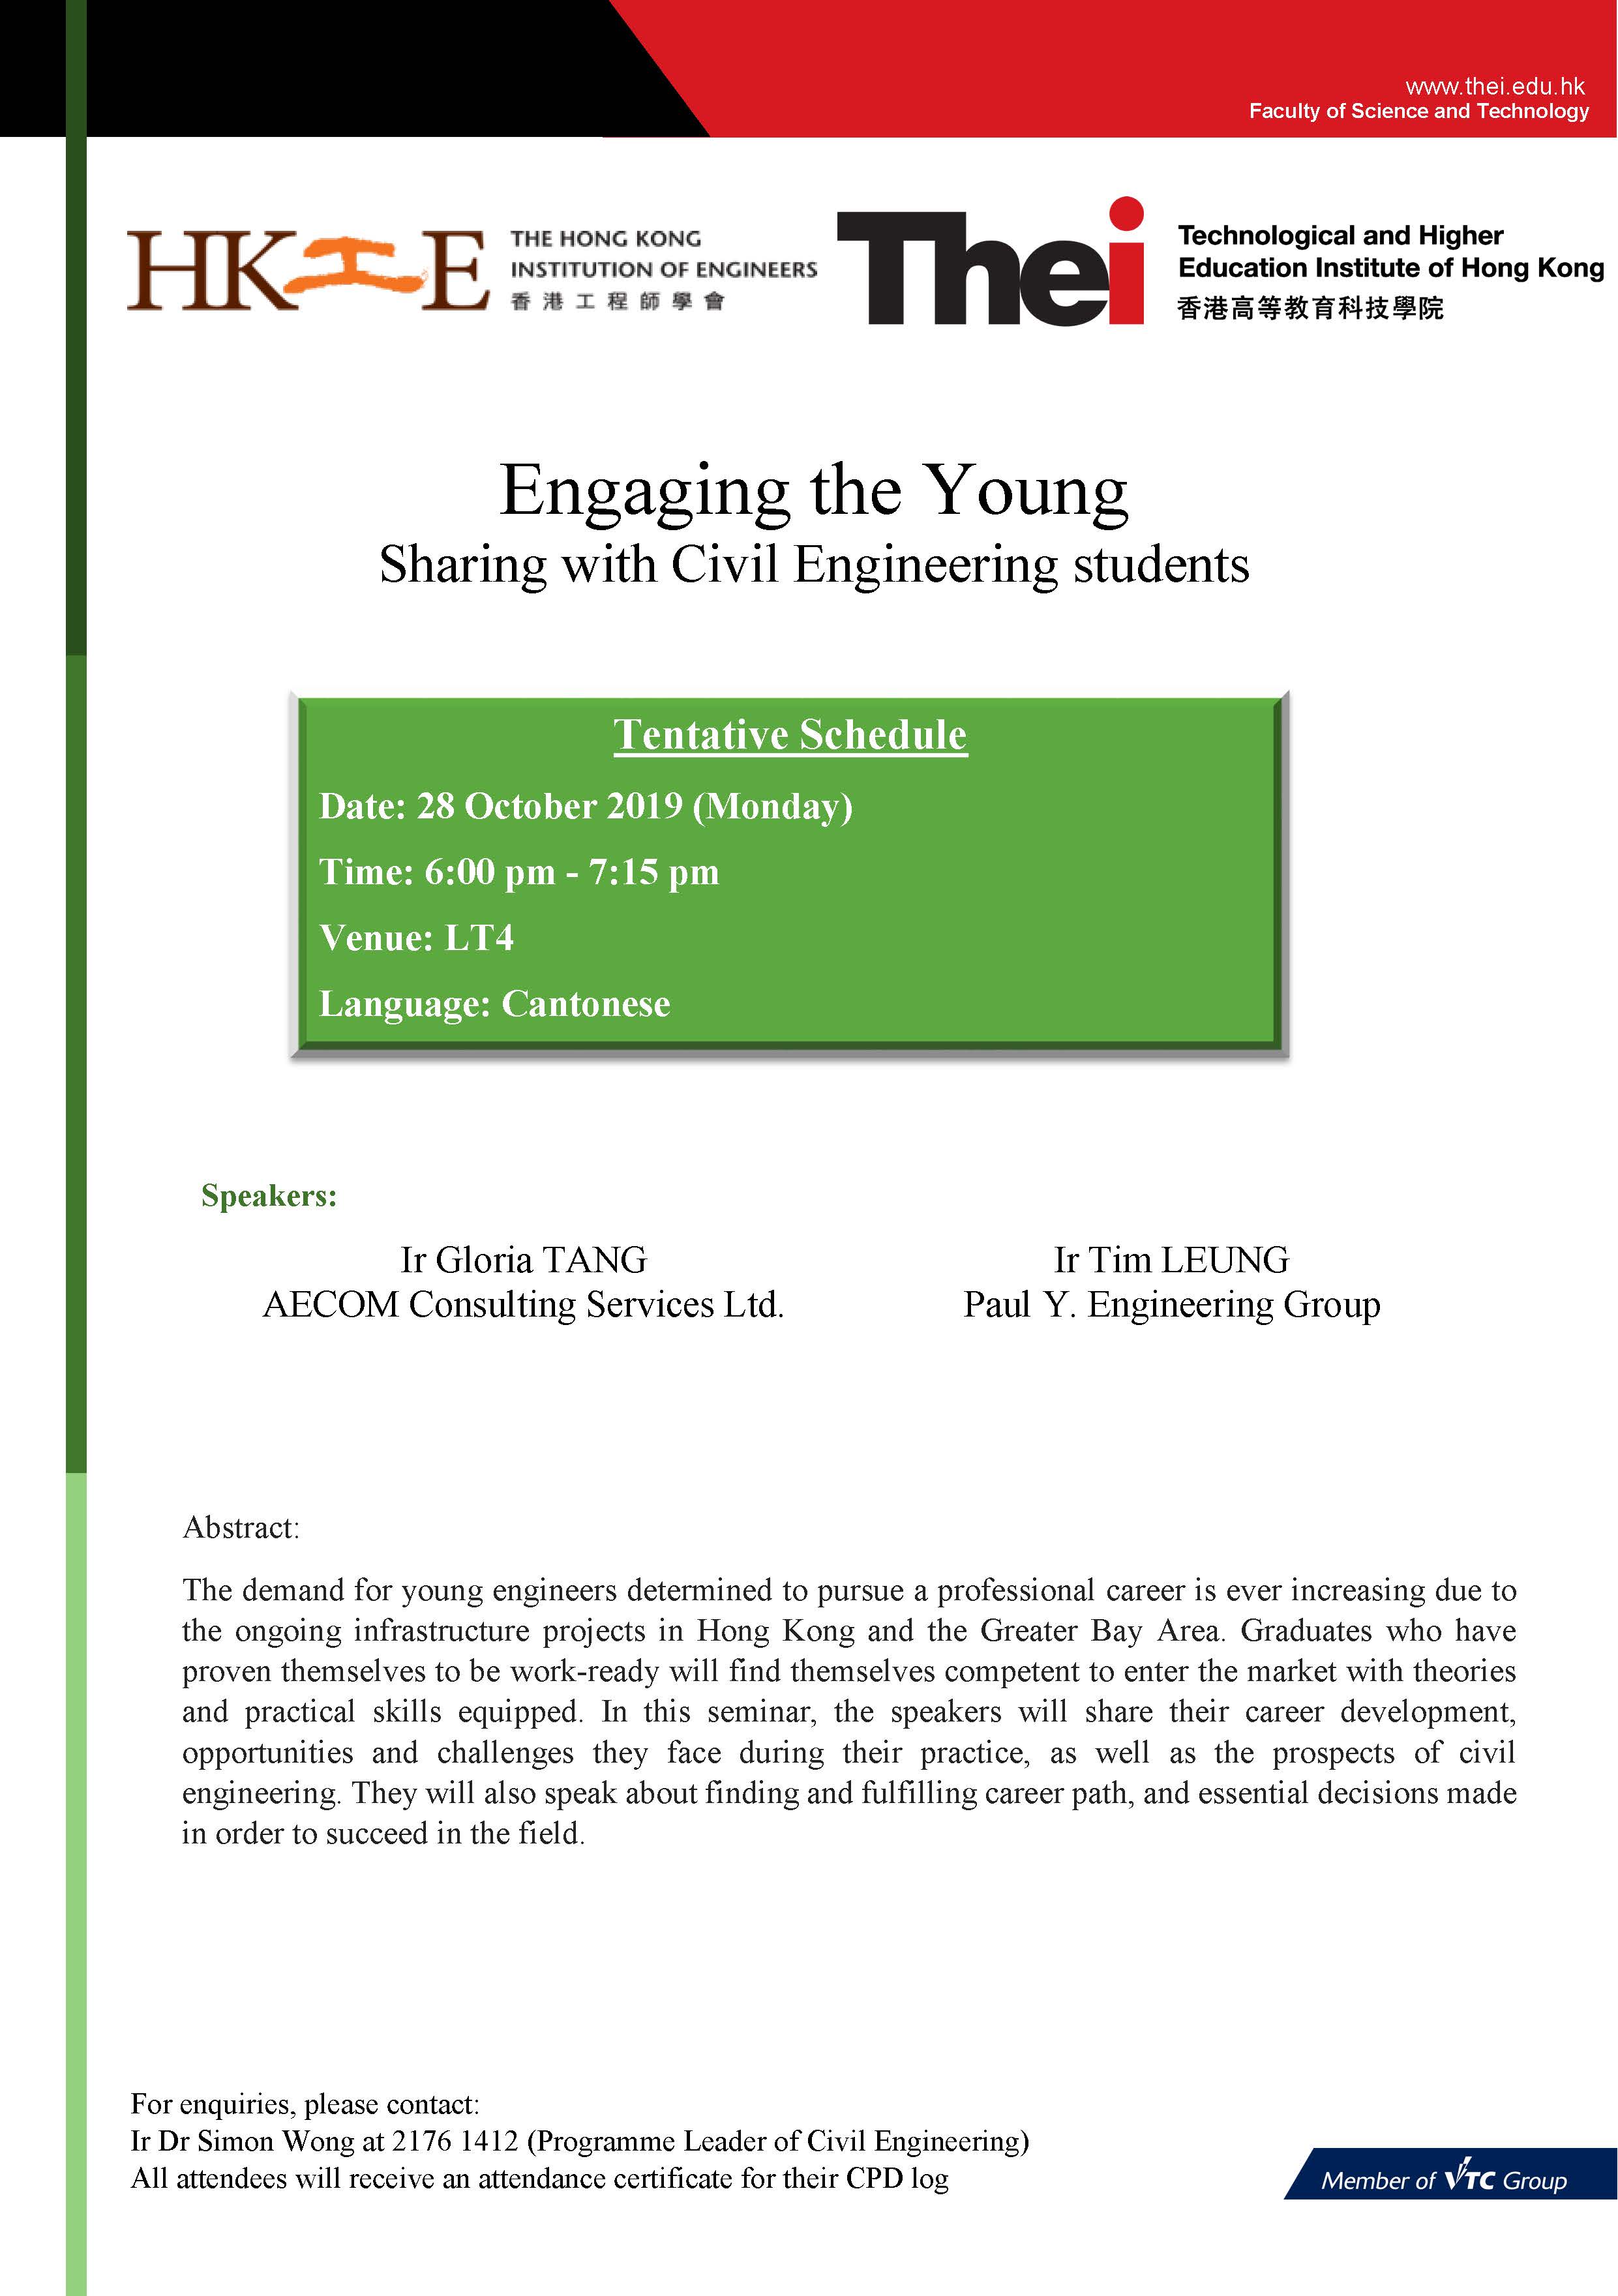 Engaging the Young Sharing with Civil Engineering students